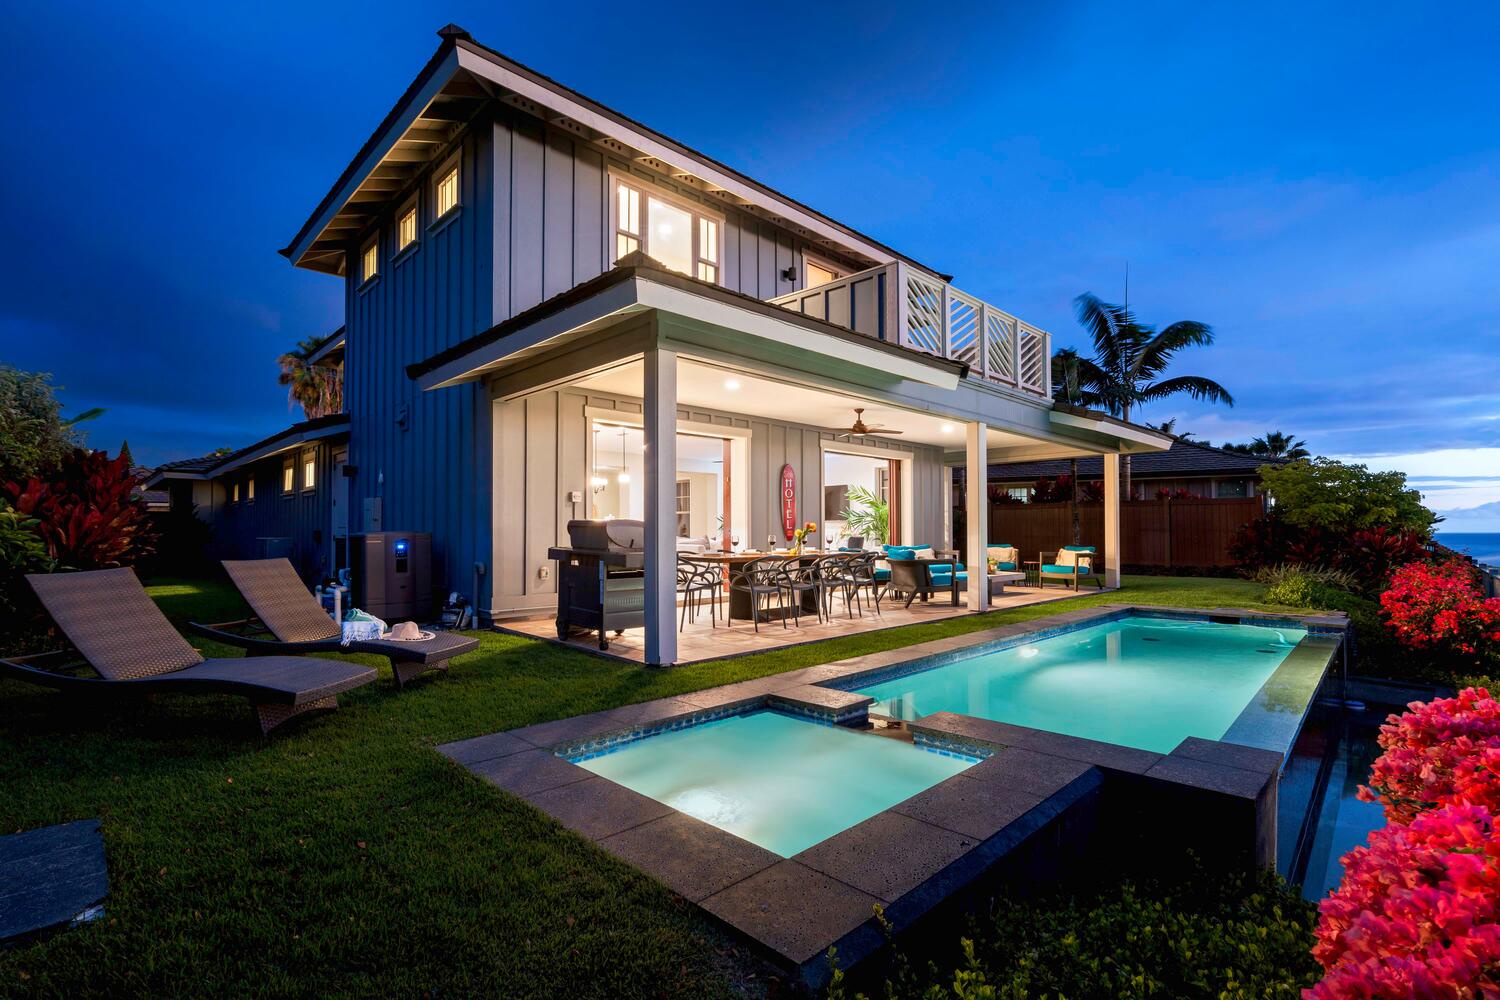 Kailua-Kona Vacation Rentals, Holua Kai #26 - Elegant two-story home illuminated at twilight, featuring a spacious pool area and a cozy outdoor dining space.